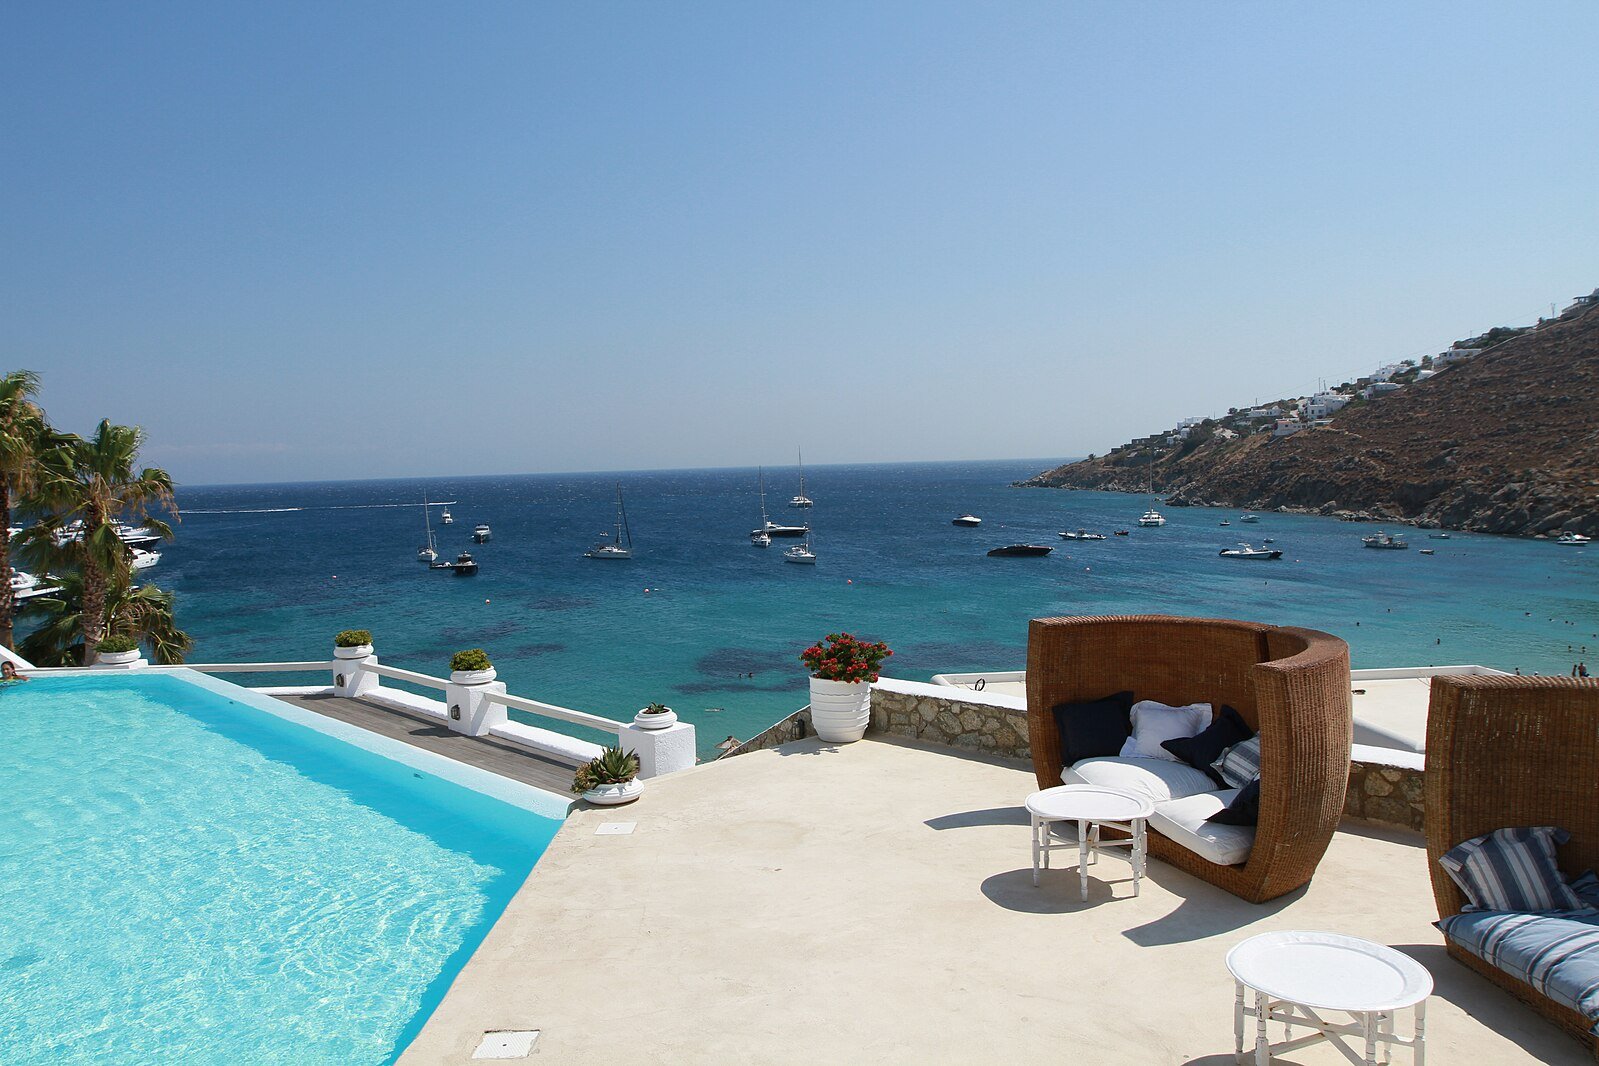 Sea view of a greek island with a pool